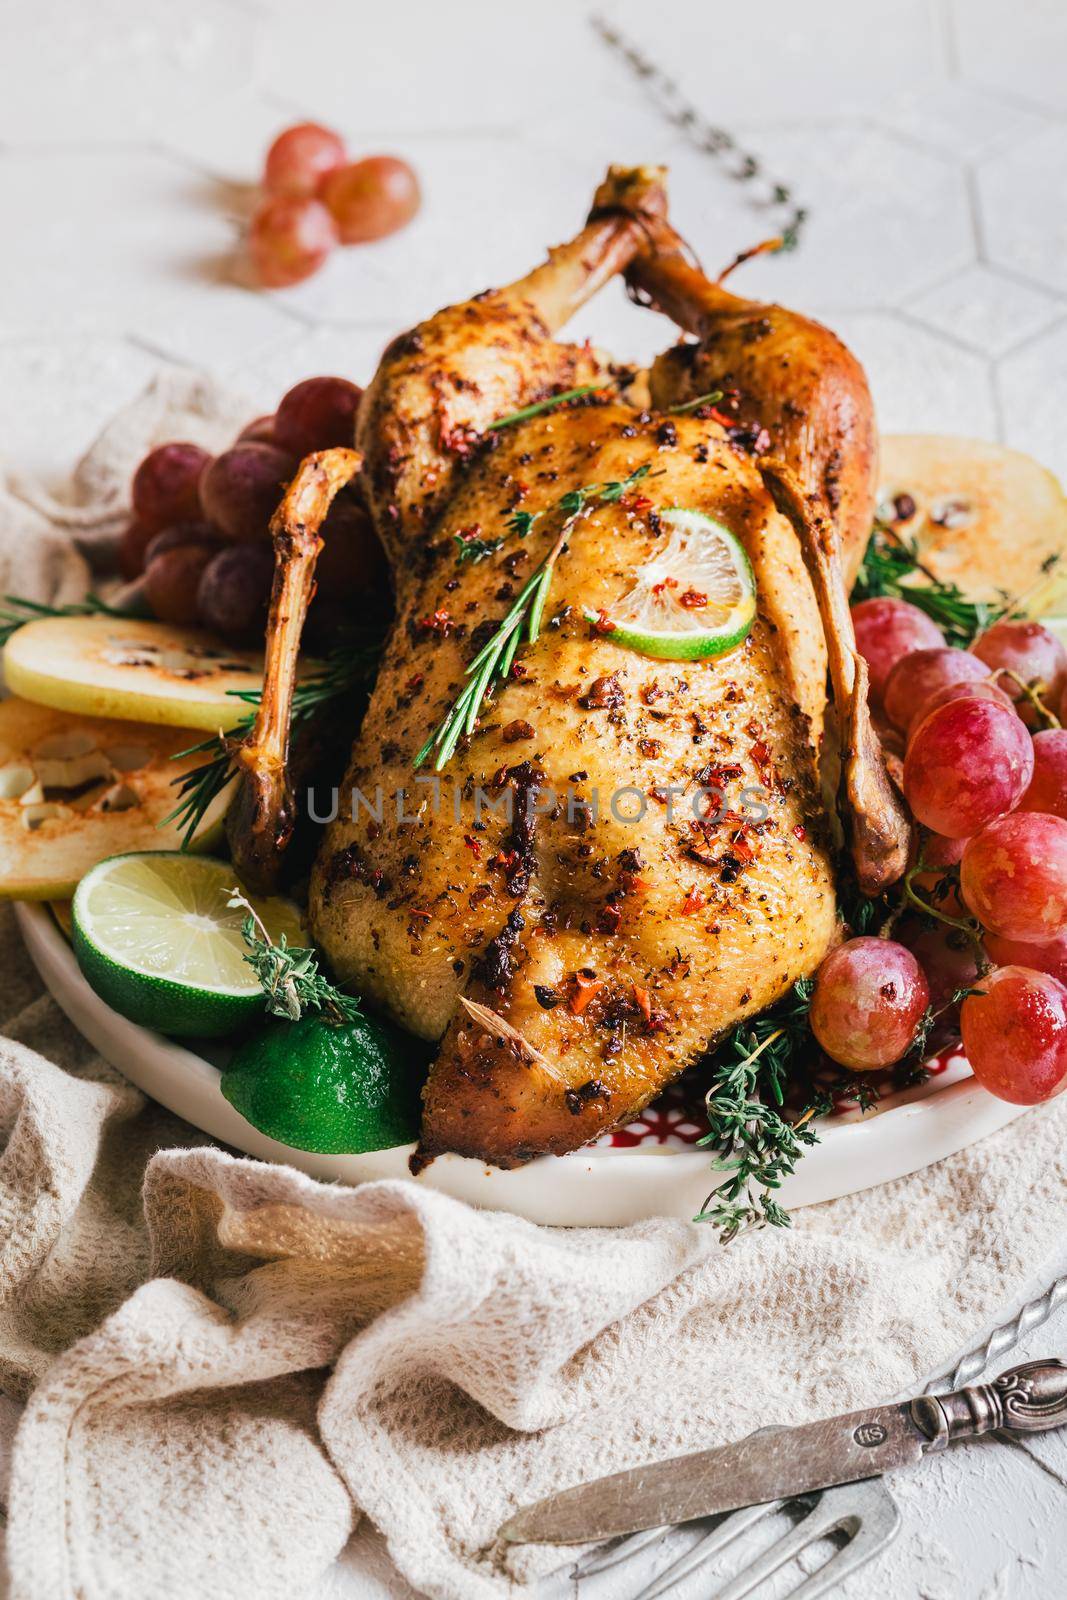 A duck baked for Thanksgiving as a symbol of family unification at a common holiday table. Still life in orange tones, shot in a light key on a white ceramic background. The atmosphere of the festival and celebration. The dish is decorated with grapes, lime, quince and aromatic herbs.